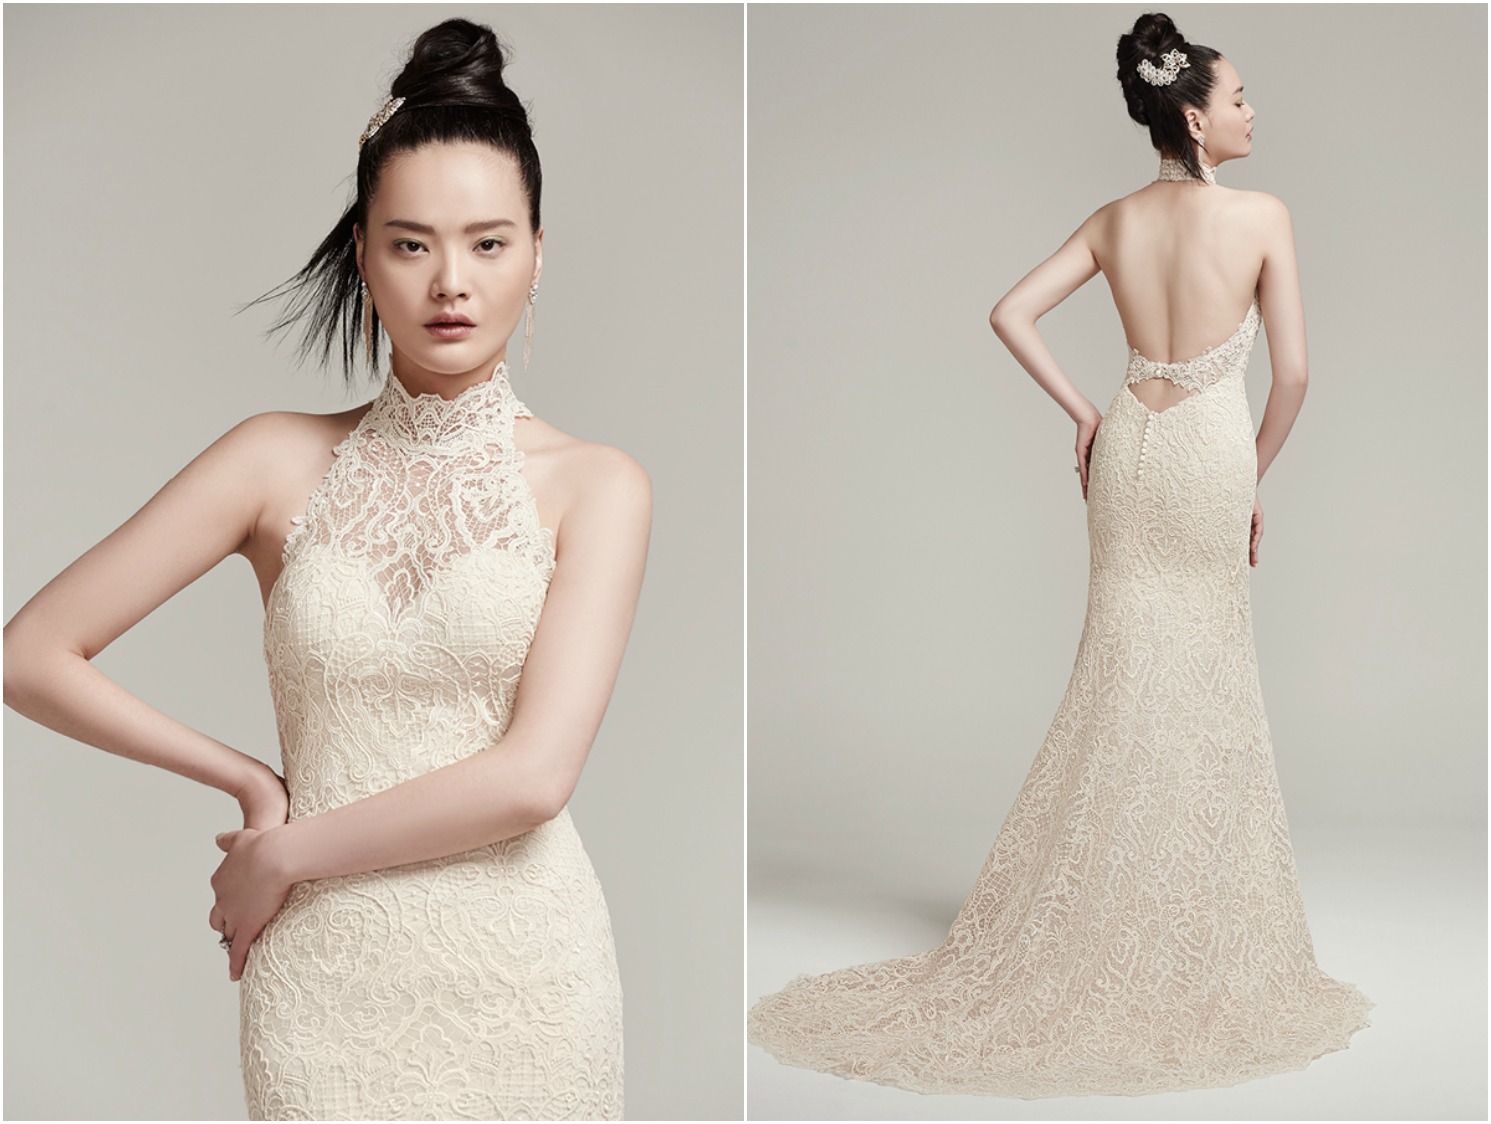 This modern allover lace sheath wedding dress features sexy elements including a statement-making illusion lace halter neckline and daring open back with illusion lace strap. Finished with covered buttons over zipper closure. 

<a href="https://www.maggiesottero.com/sottero-and-midgley/hunter/9855" target="_blank">Sottero &amp; Midgley</a>